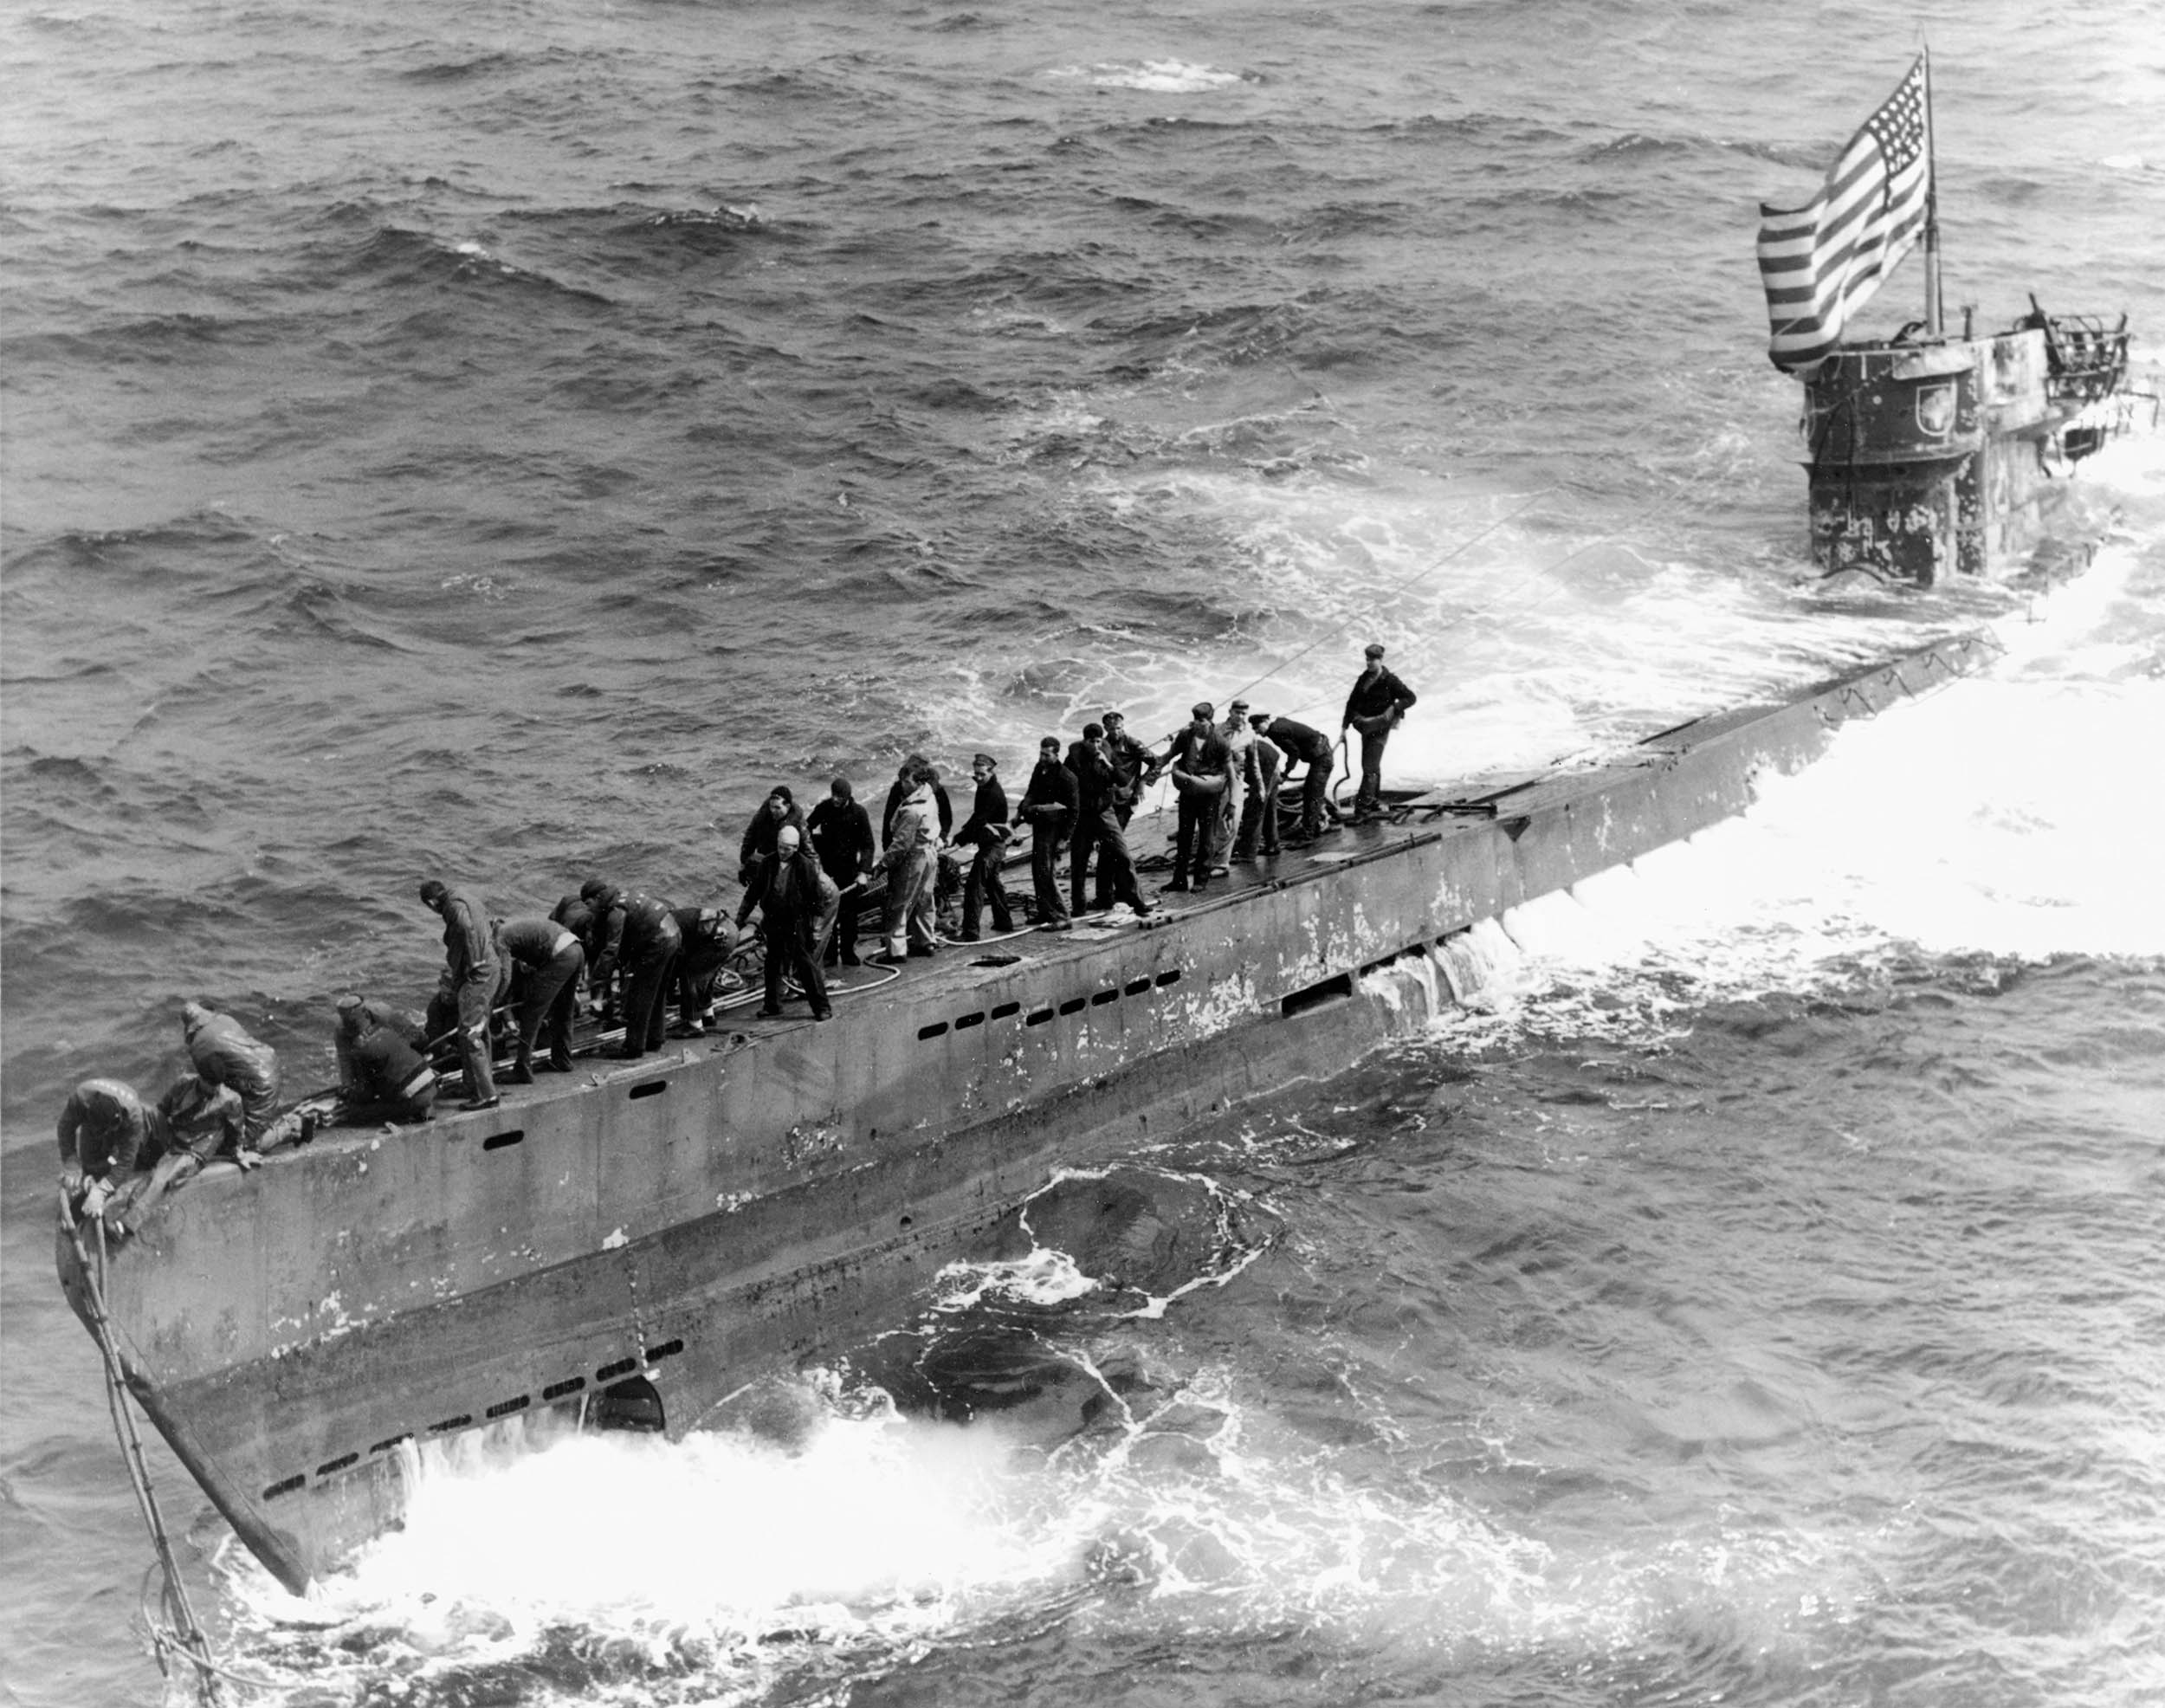 Boarding party from Navy destroyer escort USS Pillsbury works to secure tow line to bow of captured German submarine U-505, June 4, 1944 (U.S. Navy/Naval History and Heritage Command)